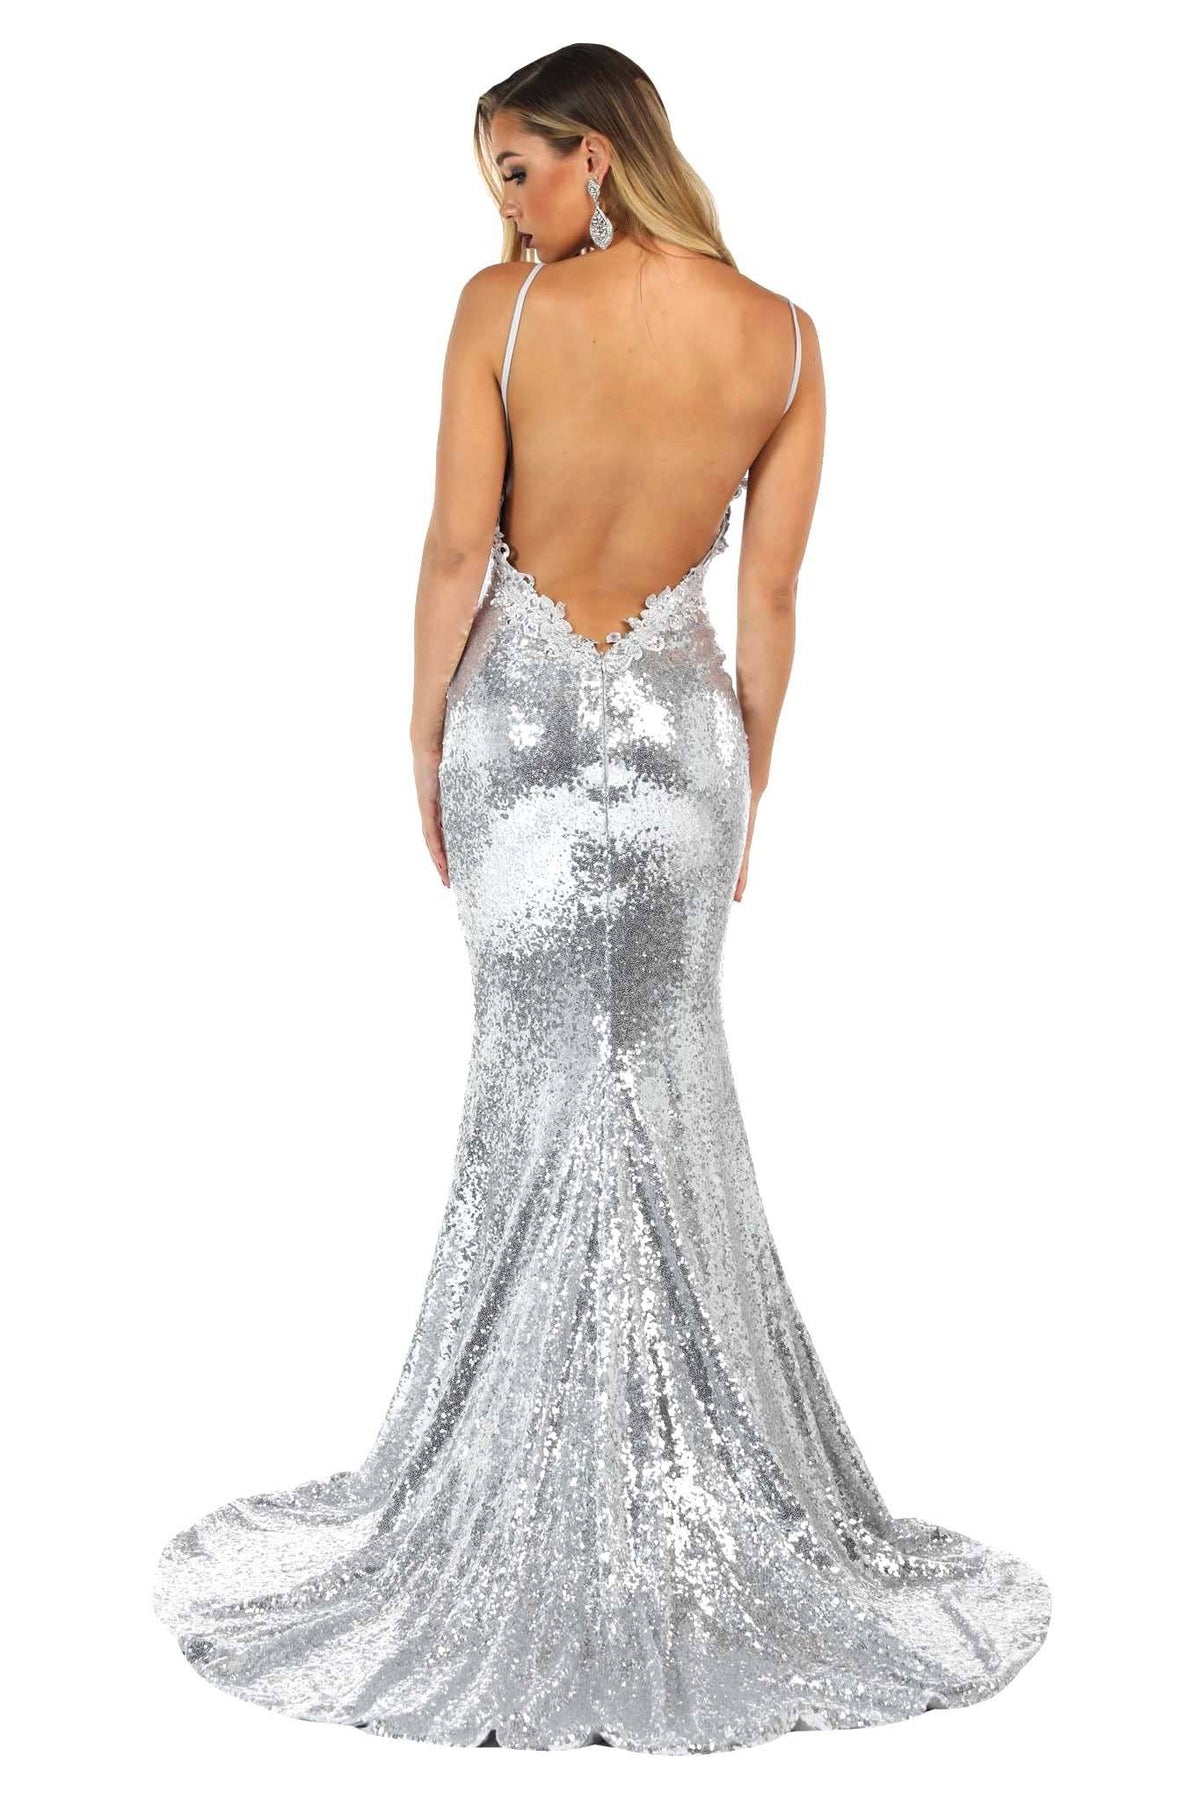 V backless design of Silver sleeveless fitted sequin evening long gown featuring V neckline with beaded lace detailing, thin shoulder straps and very long train